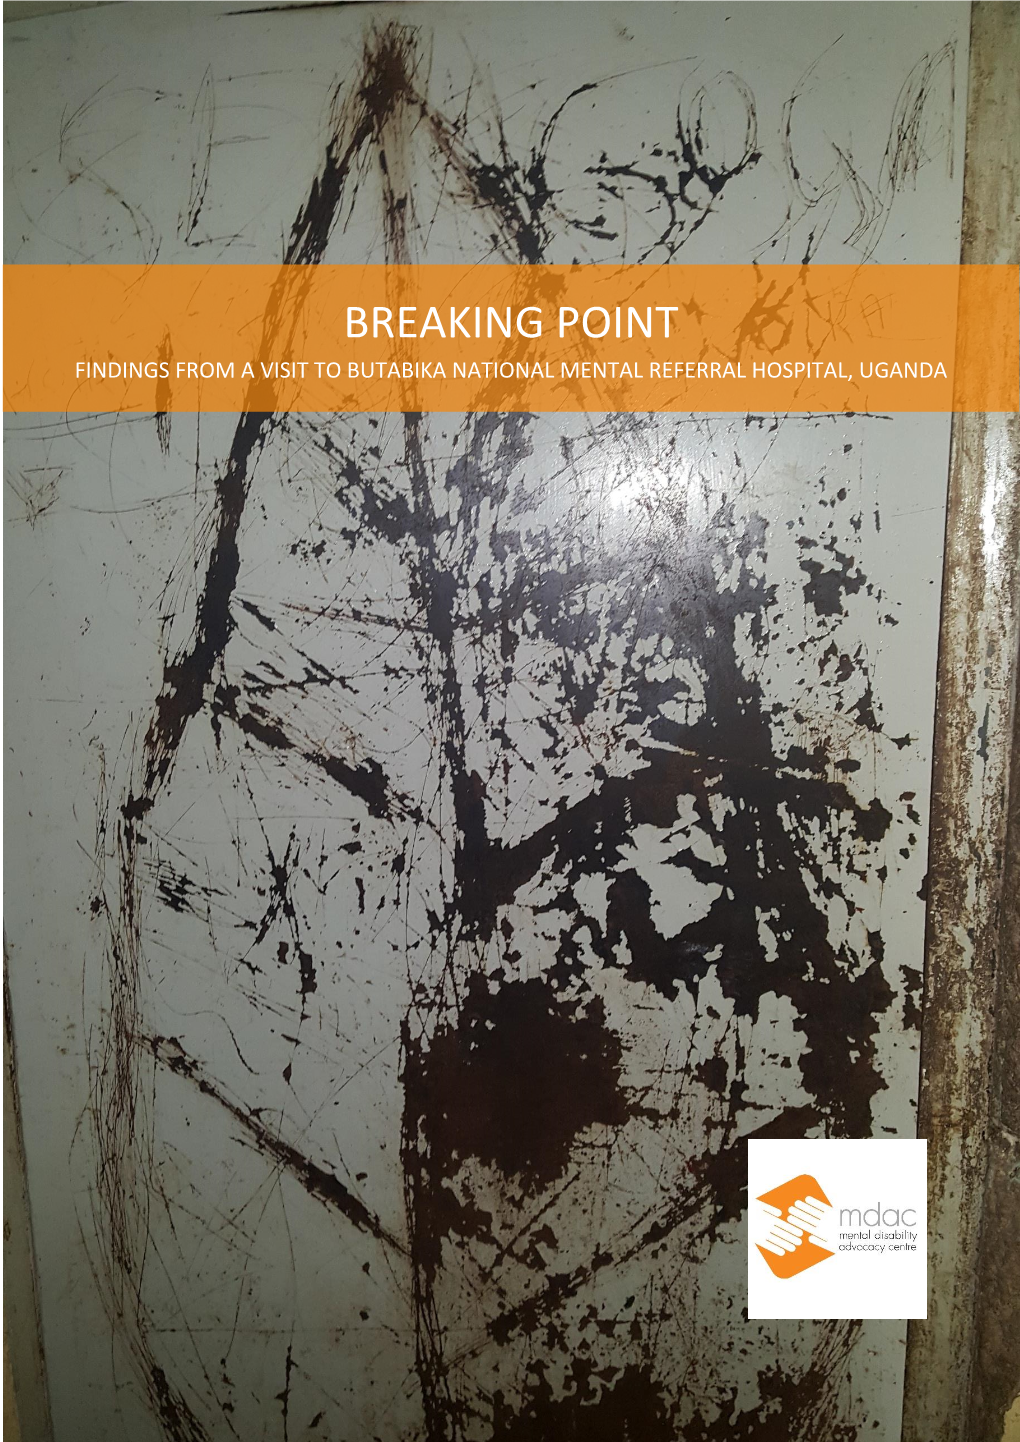 Breaking Point Findings from a Visit to Butabika National Mental Referral Hospital, Uganda